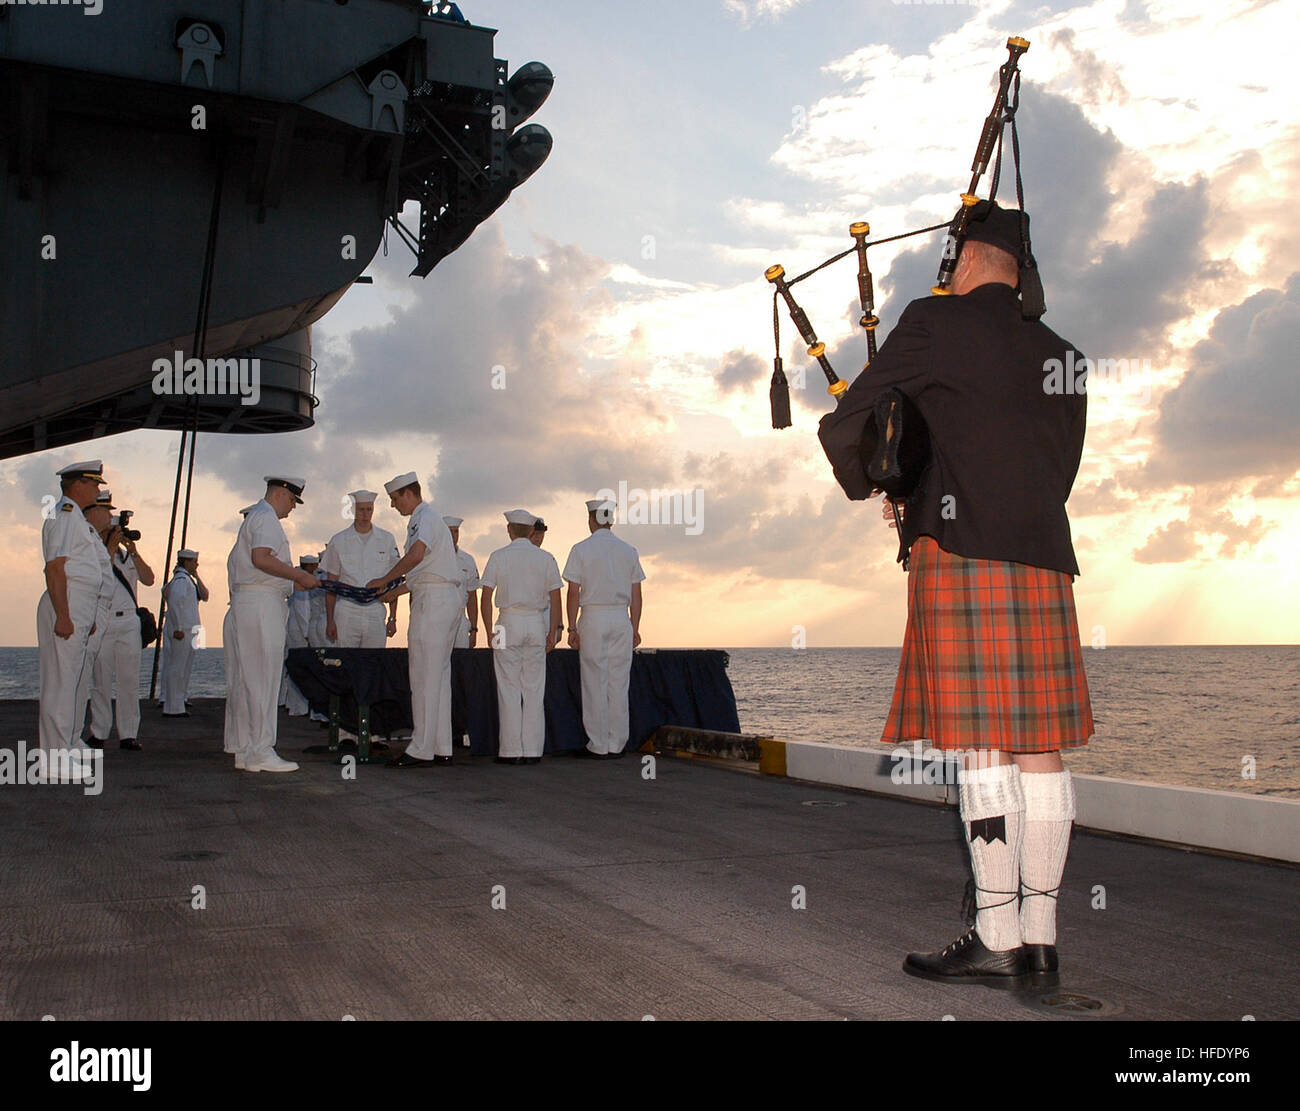 040519-N-0119G-009 Atlantic Ocean (May 19, 2004) - USS Enterprise (CVN 65) combat systems department officer, Cmdr. Mark Sanford plays 'Amazing Grace' on the bag pipes during a Burial at Sea ceremony conducted from one of the ship's aircraft elevators aboard the aircraft carrier USS Enterprise (CVN 65) for Machinist's Mate 3rd Class Nathan Taylor. Enterprise is currently underway conducting Carrier Qualifications in the Atlantic Ocean. For more information on the burial at sea program visit the Navy's web site at: http://www.chinfo.navy.mil/navpalib/questions/burial.html. U.S. Navy photo by Ph Stock Photo